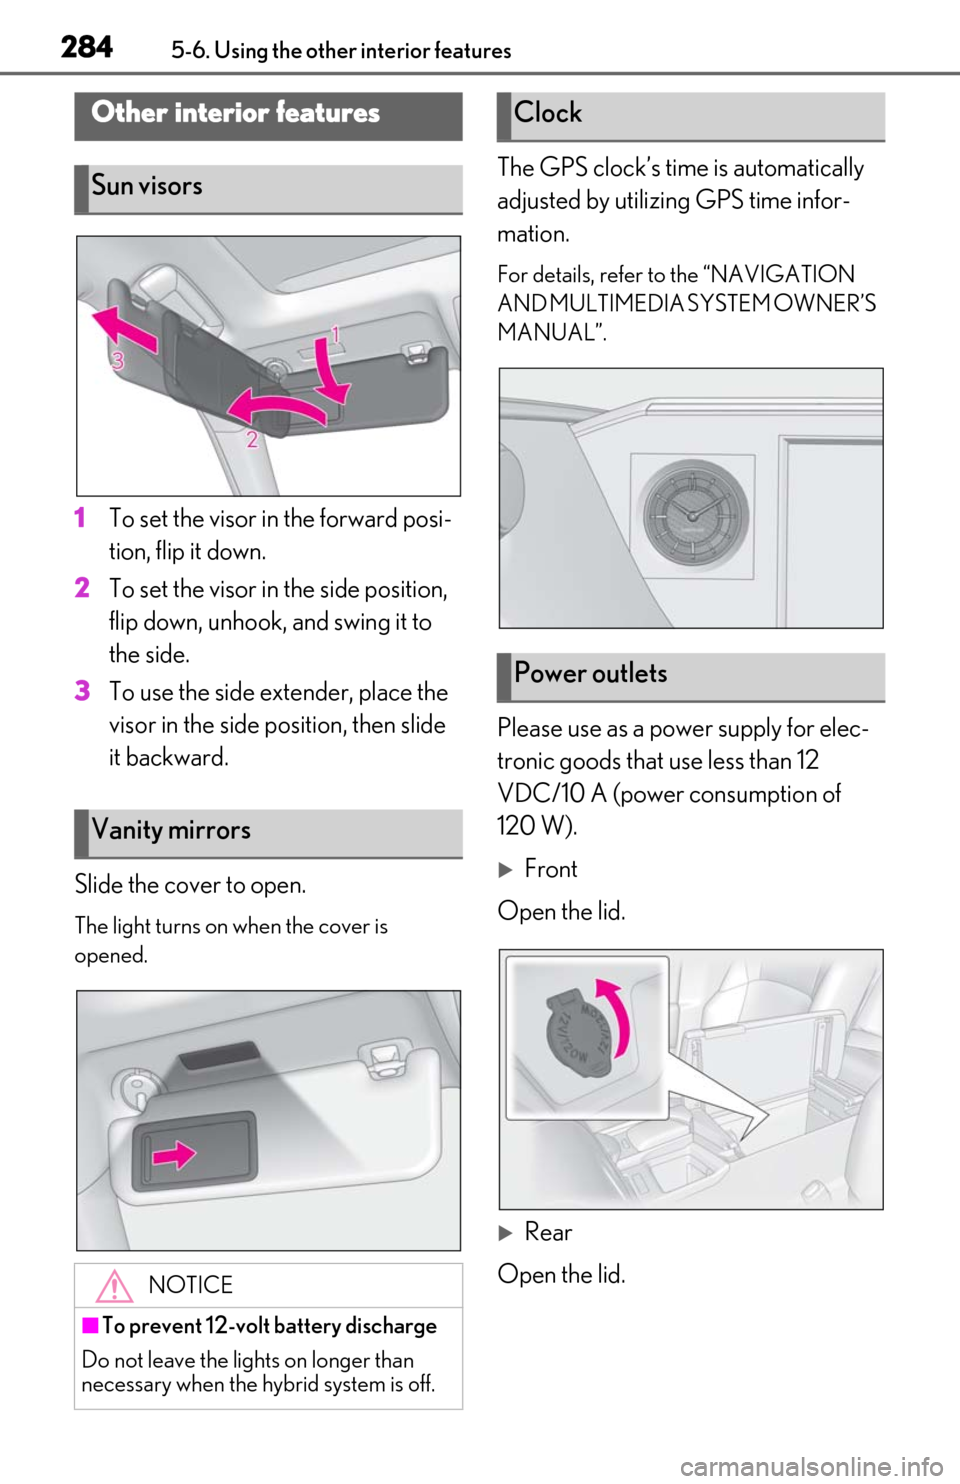 Lexus ES300h 2020  Owners Manual (OM06196U) 2845-6. Using the other interior features
5-6.Using the other interior features
1To set the visor in the forward posi-
tion, flip it down.
2
To set the visor in the side position, 
flip down, unhook, 